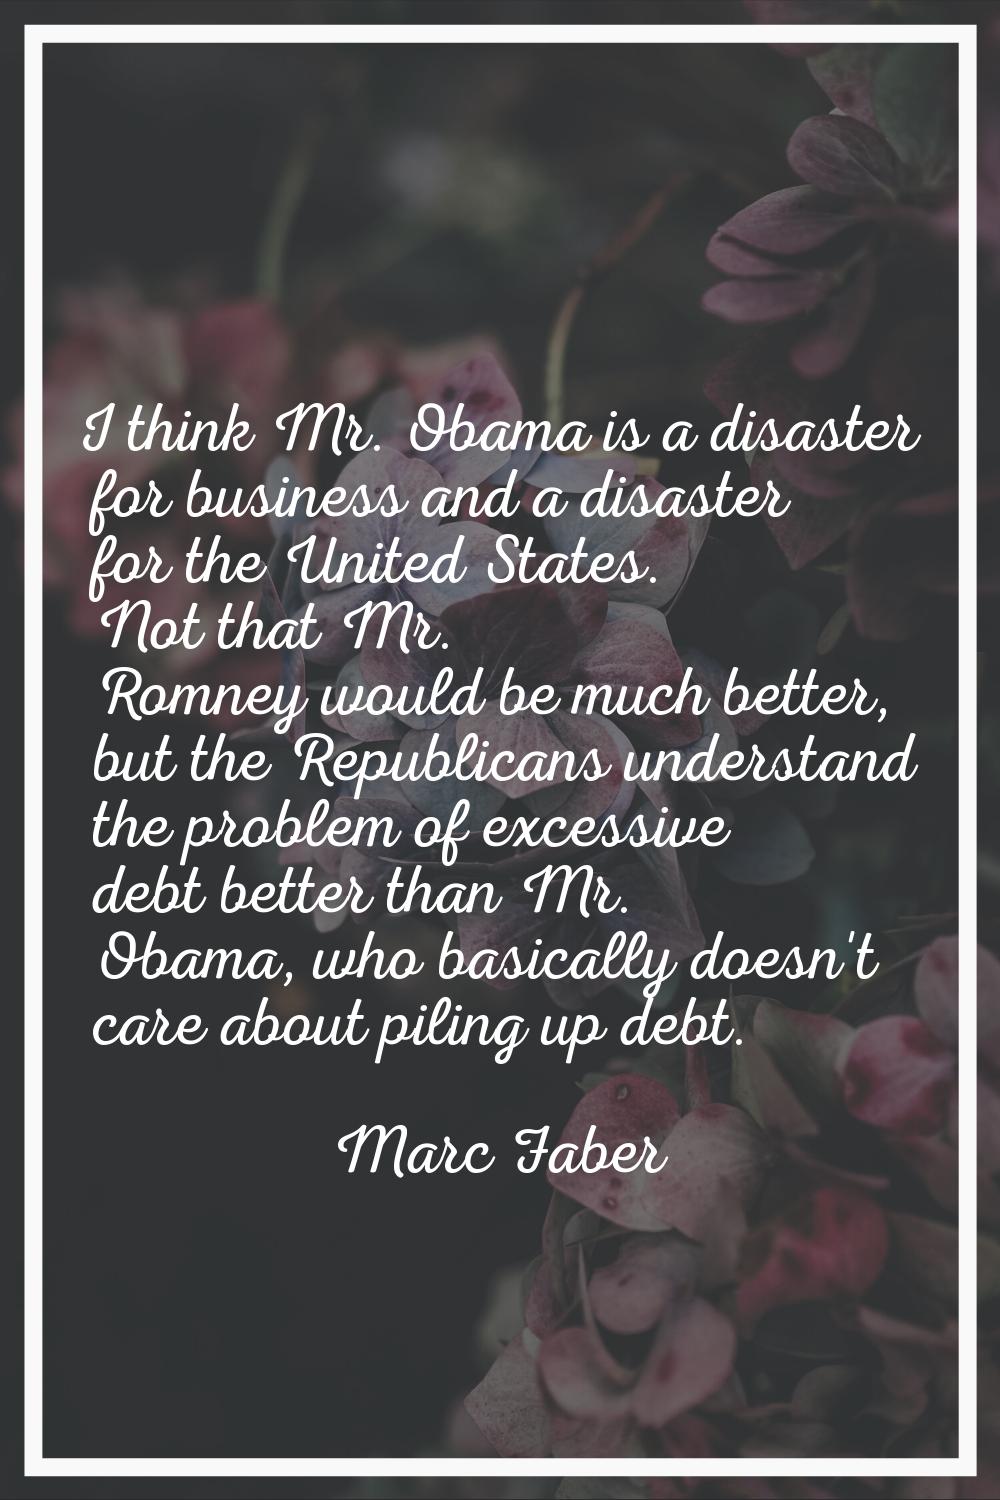 I think Mr. Obama is a disaster for business and a disaster for the United States. Not that Mr. Rom